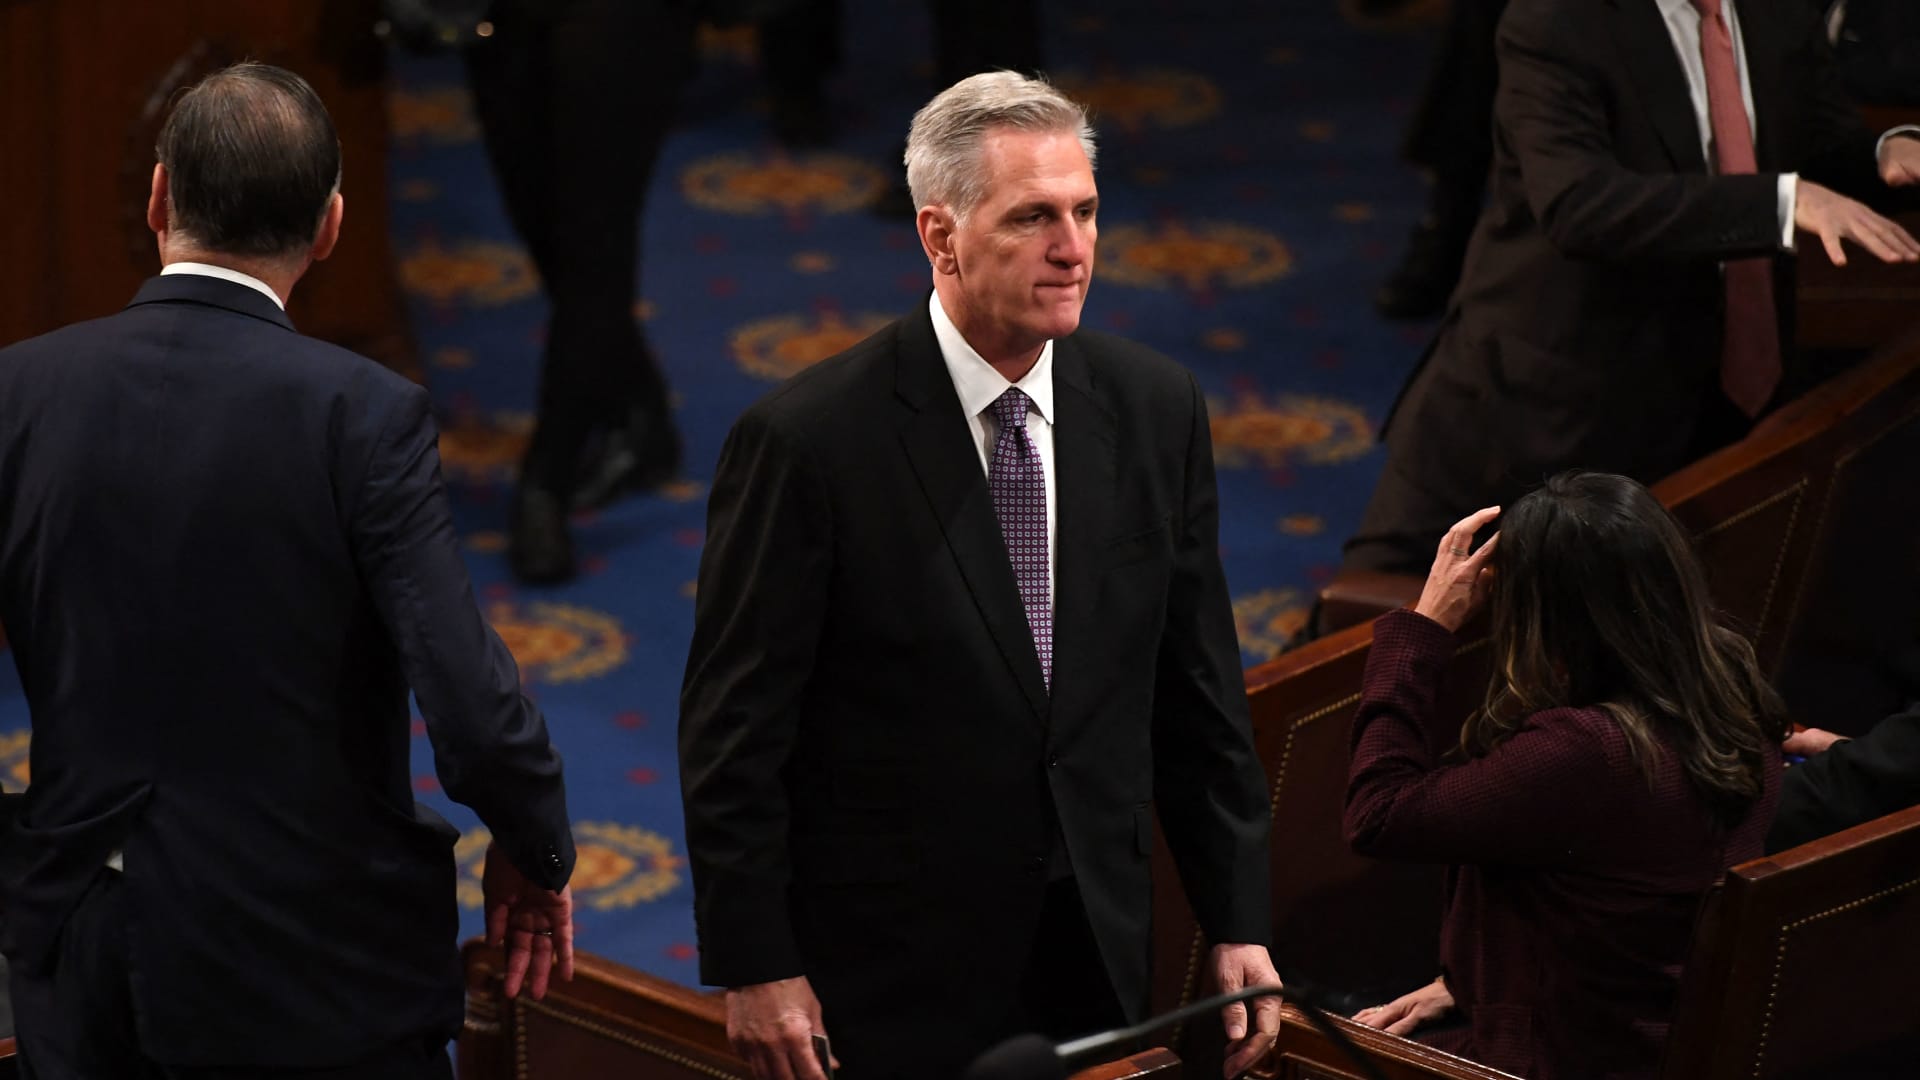 US Republican Representative from California Kevin McCarthy arrives as the US House of Representatives continues voting for new speaker at the US Capitol in Washington, DC, January 4, 2023.